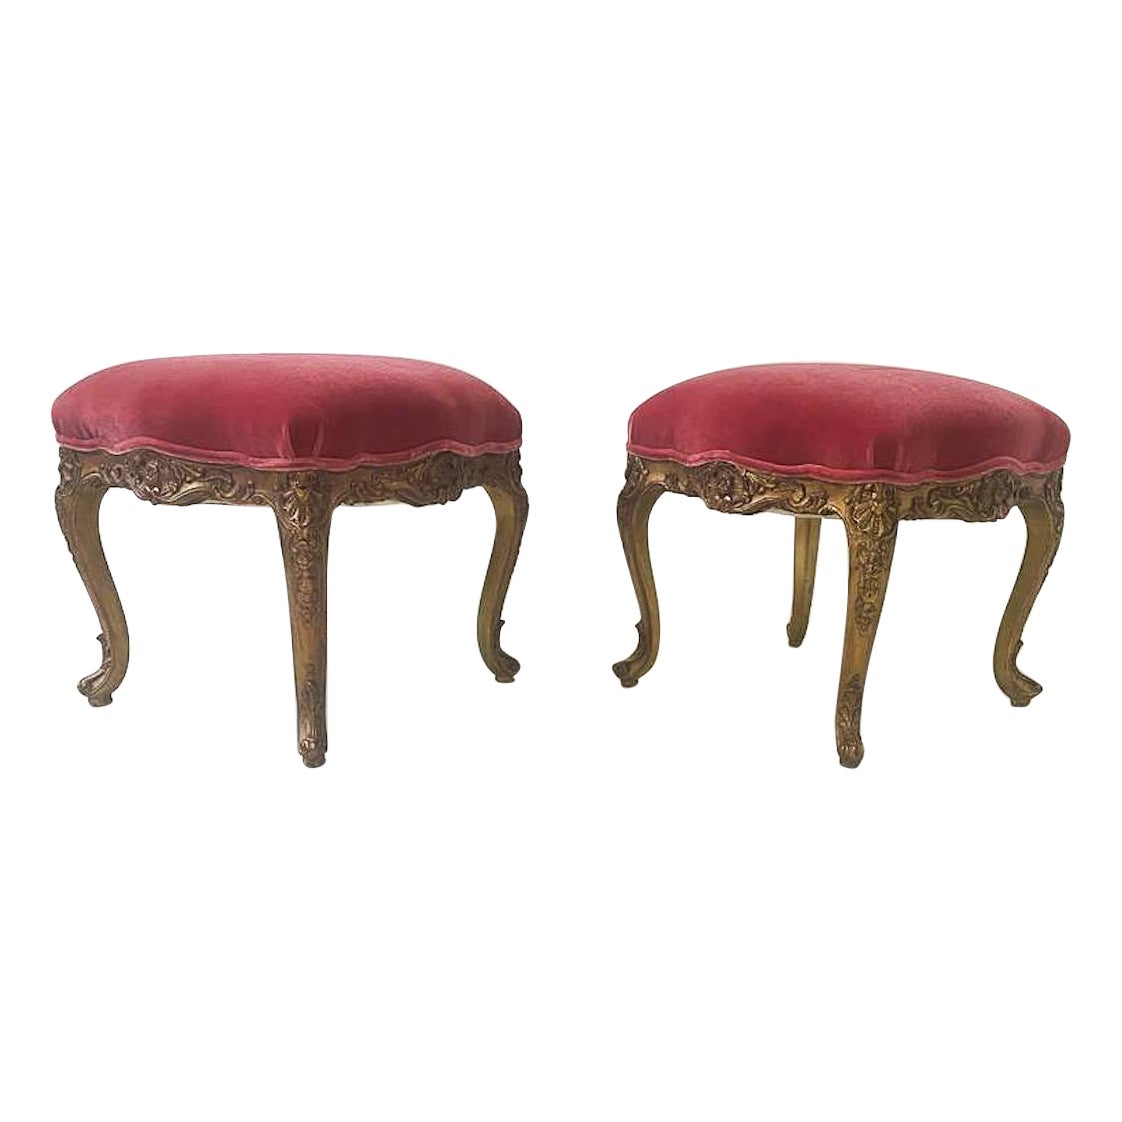 Contemporary Pair of Stools Louis XV Style, Red Velvet, Belgium For Sale